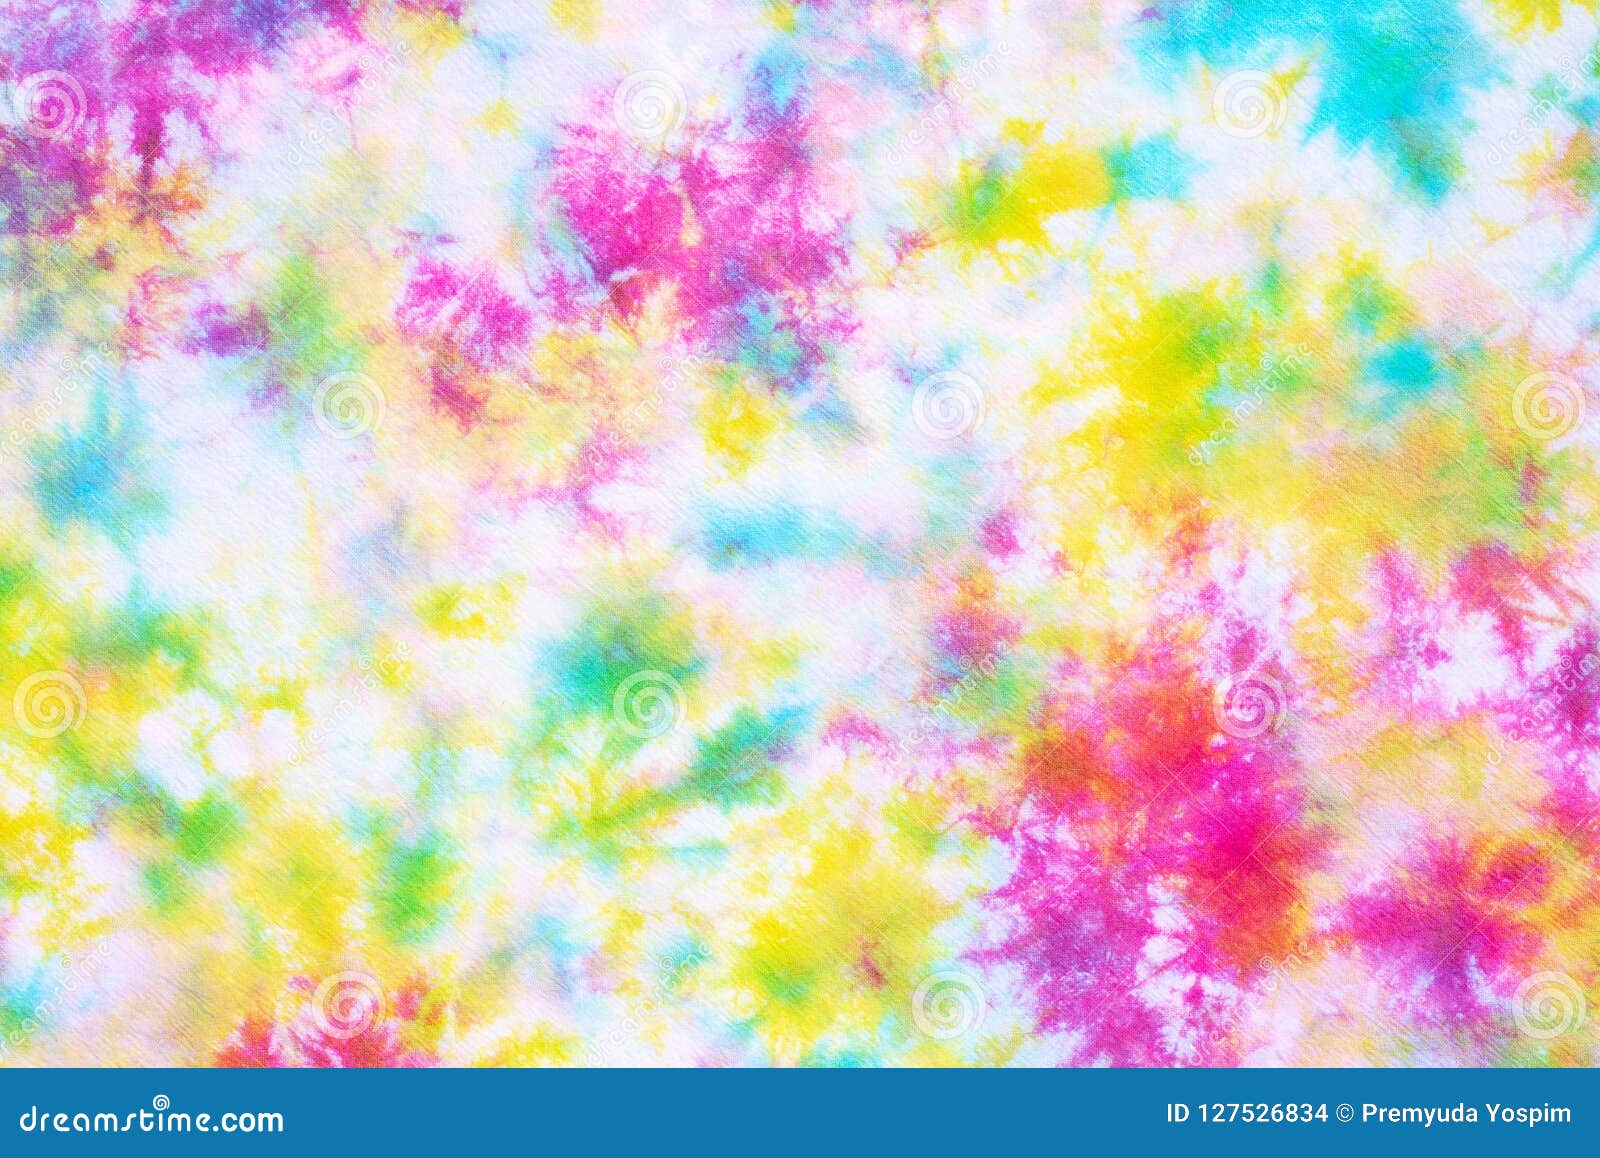 https://thumbs.dreamstime.com/z/colorful-tie-dye-pattern-abstract-background-127526834.jpg